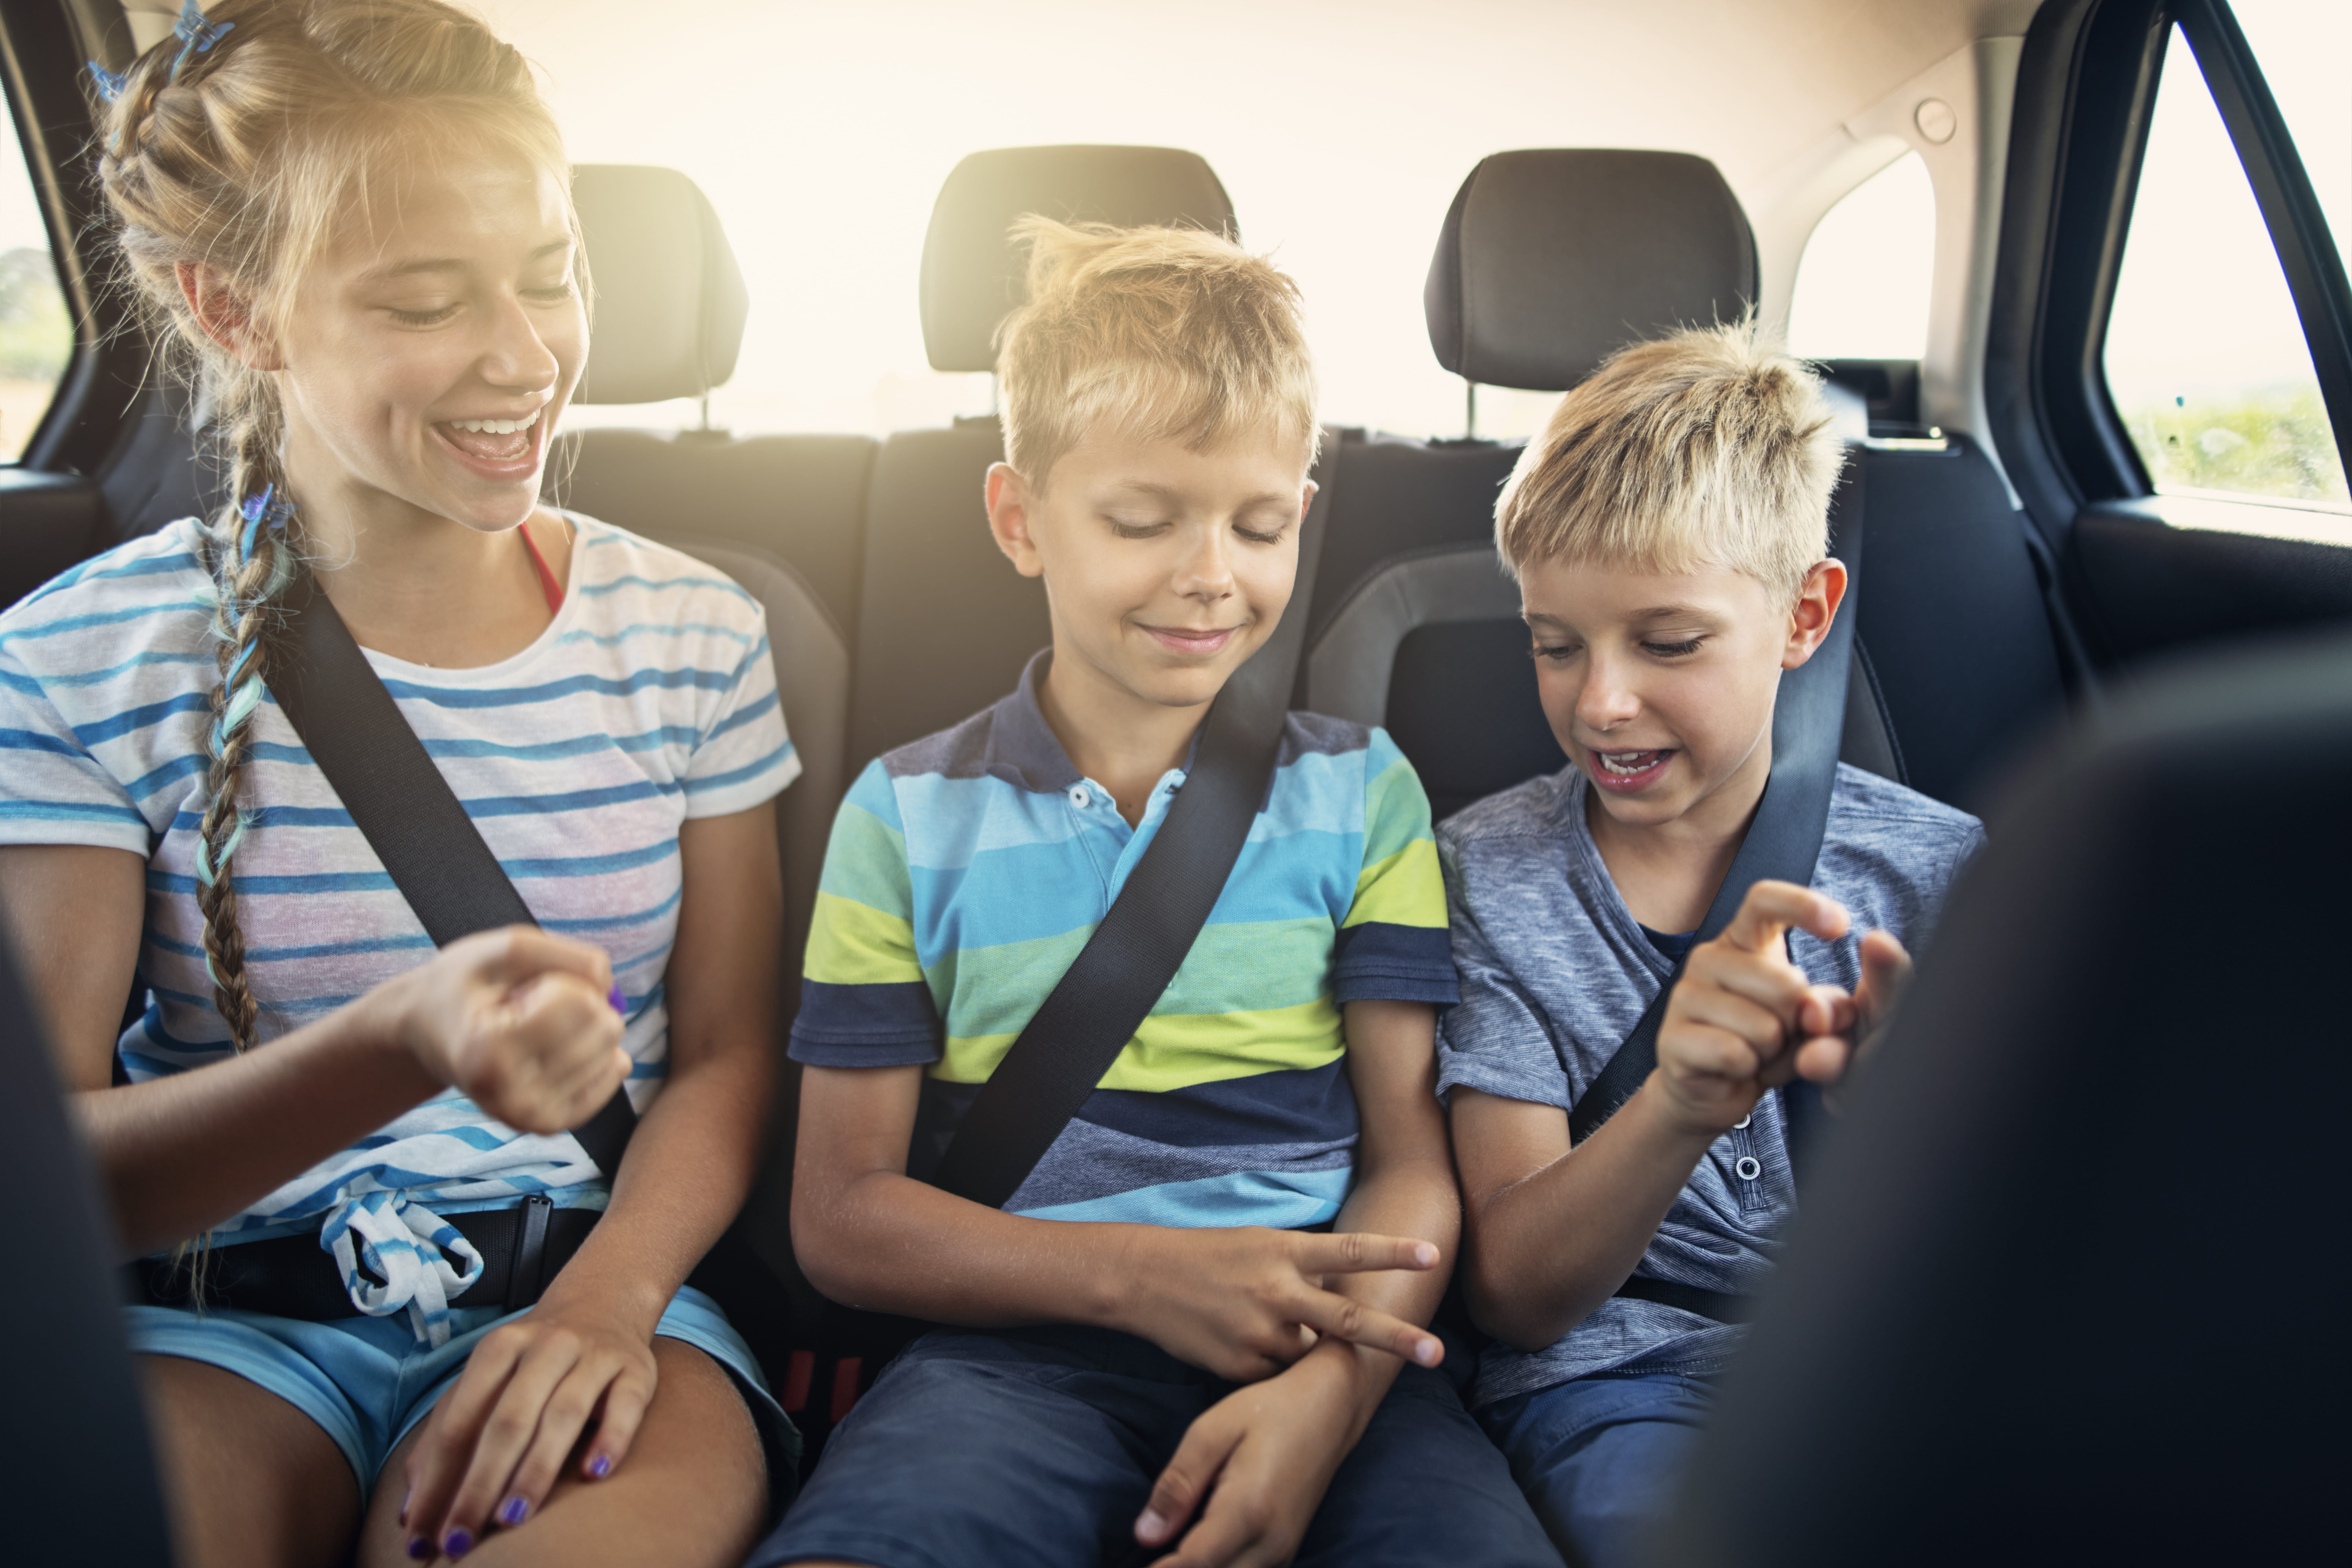 7 Ways to Keep Children Entertained on the Road